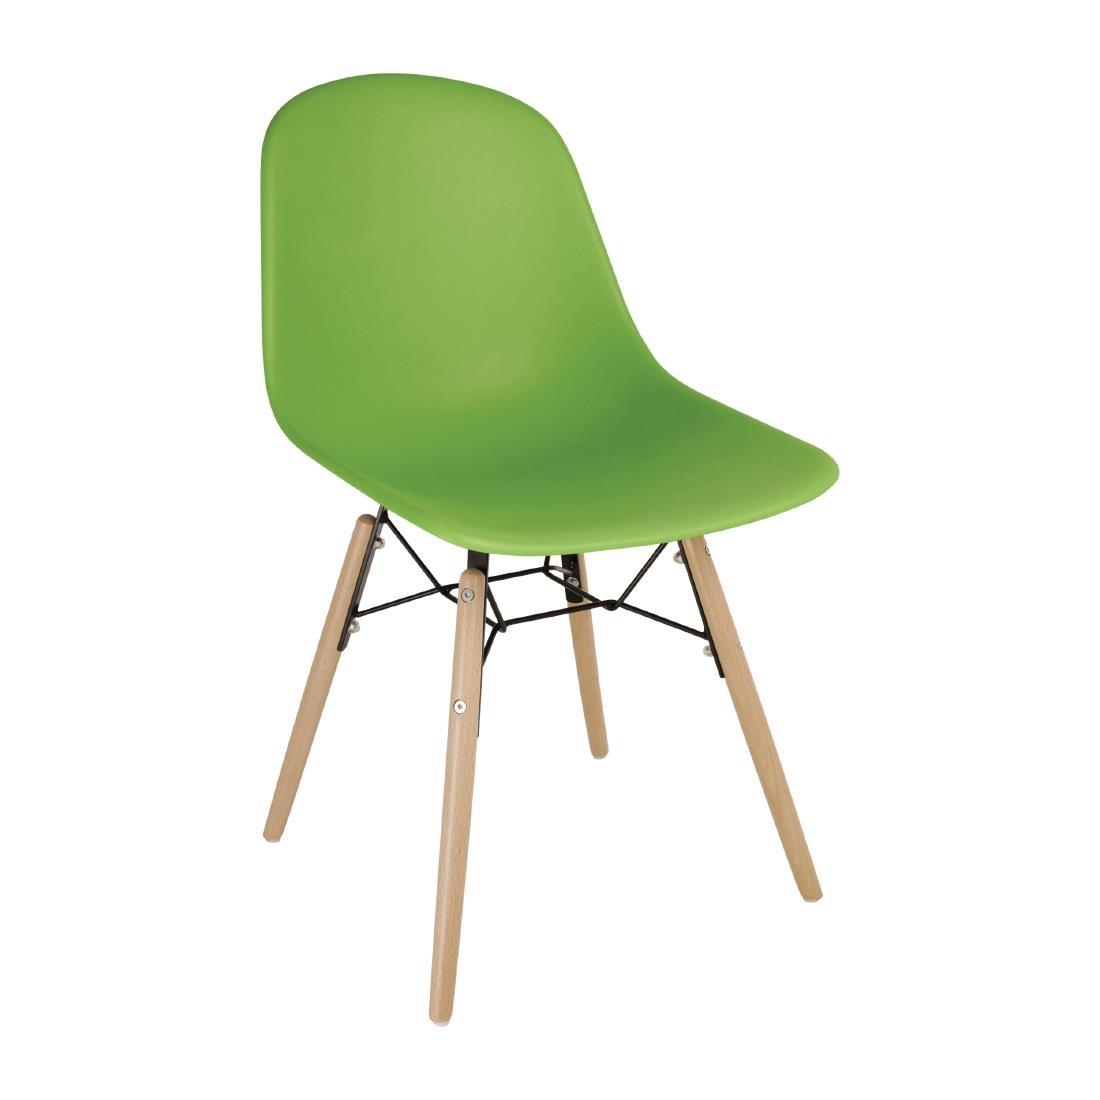 Bolero PP Moulded Side Chair Green with Spindle Legs (Pack of 2) - DM843  - 1